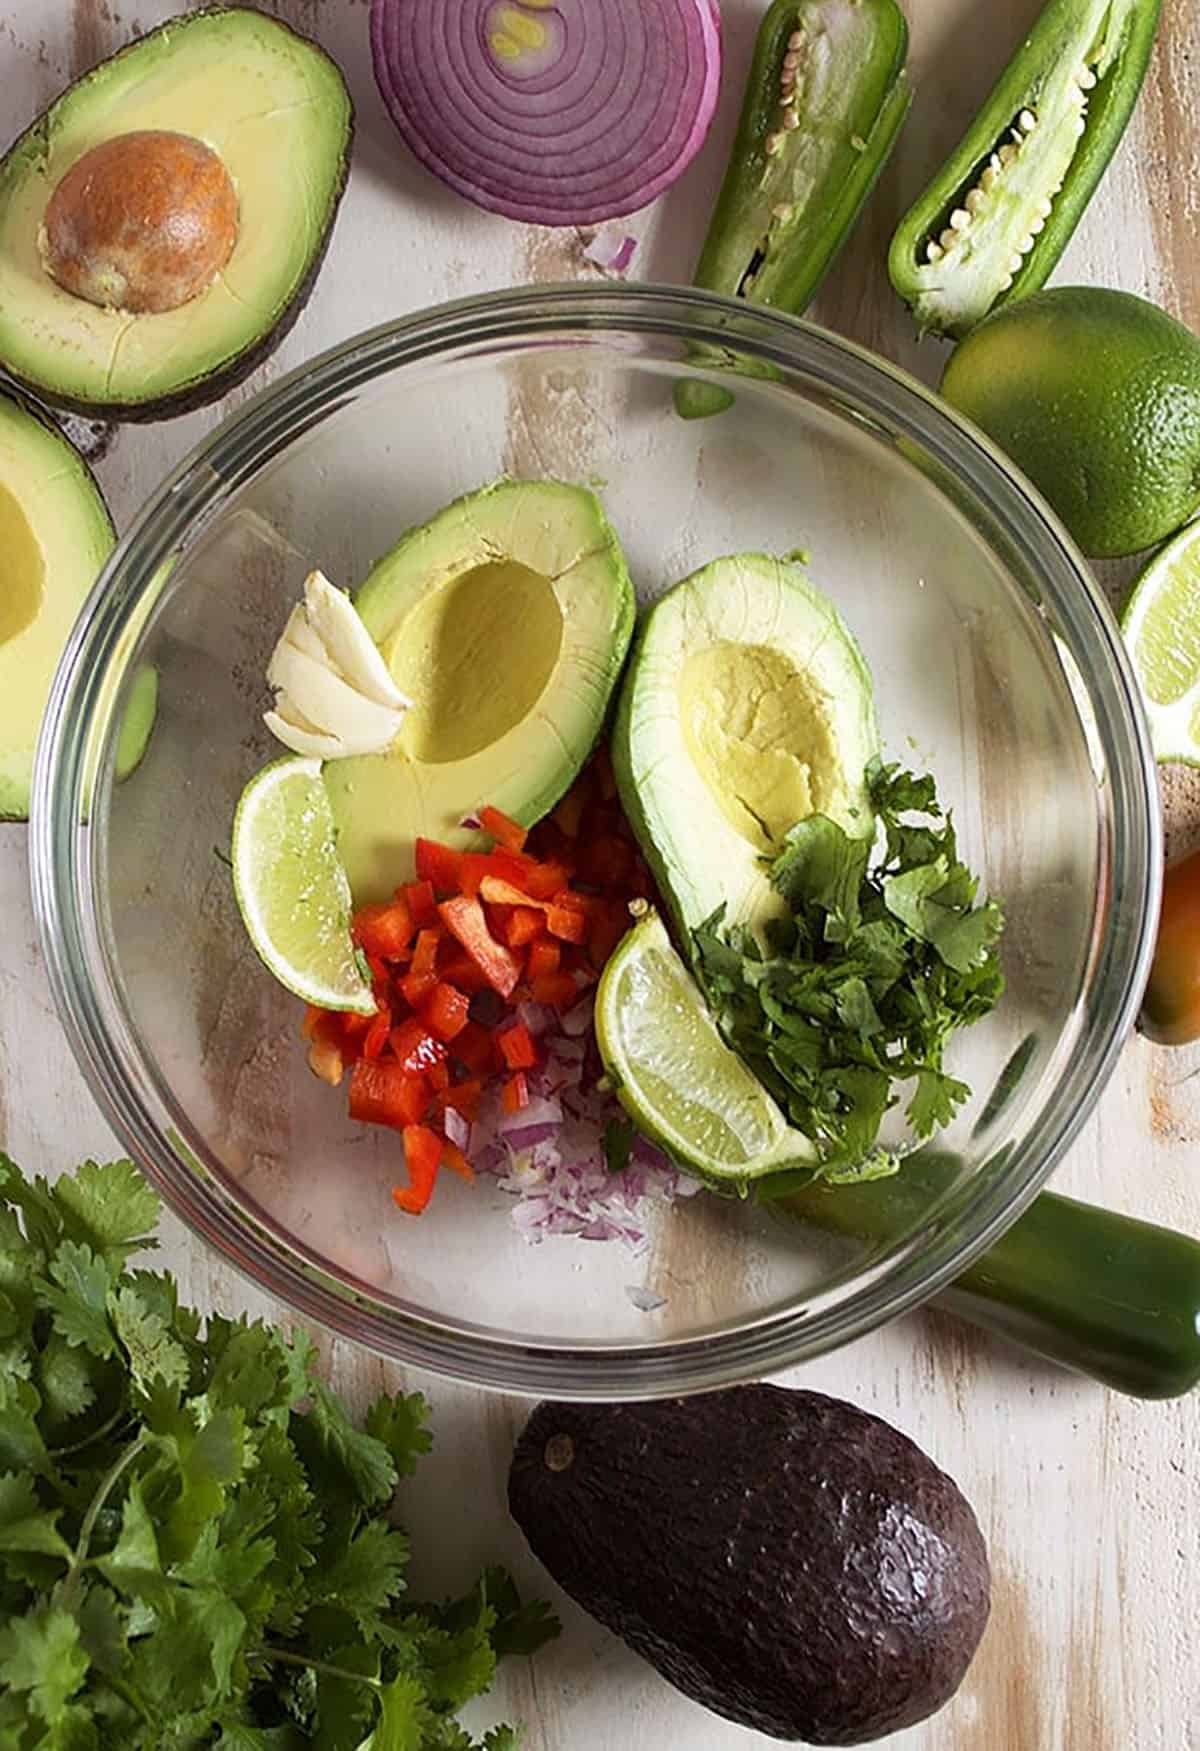 Guacamole ingredients in a glass bowl with half an avocado, jalapeno cut in half and cilantro.